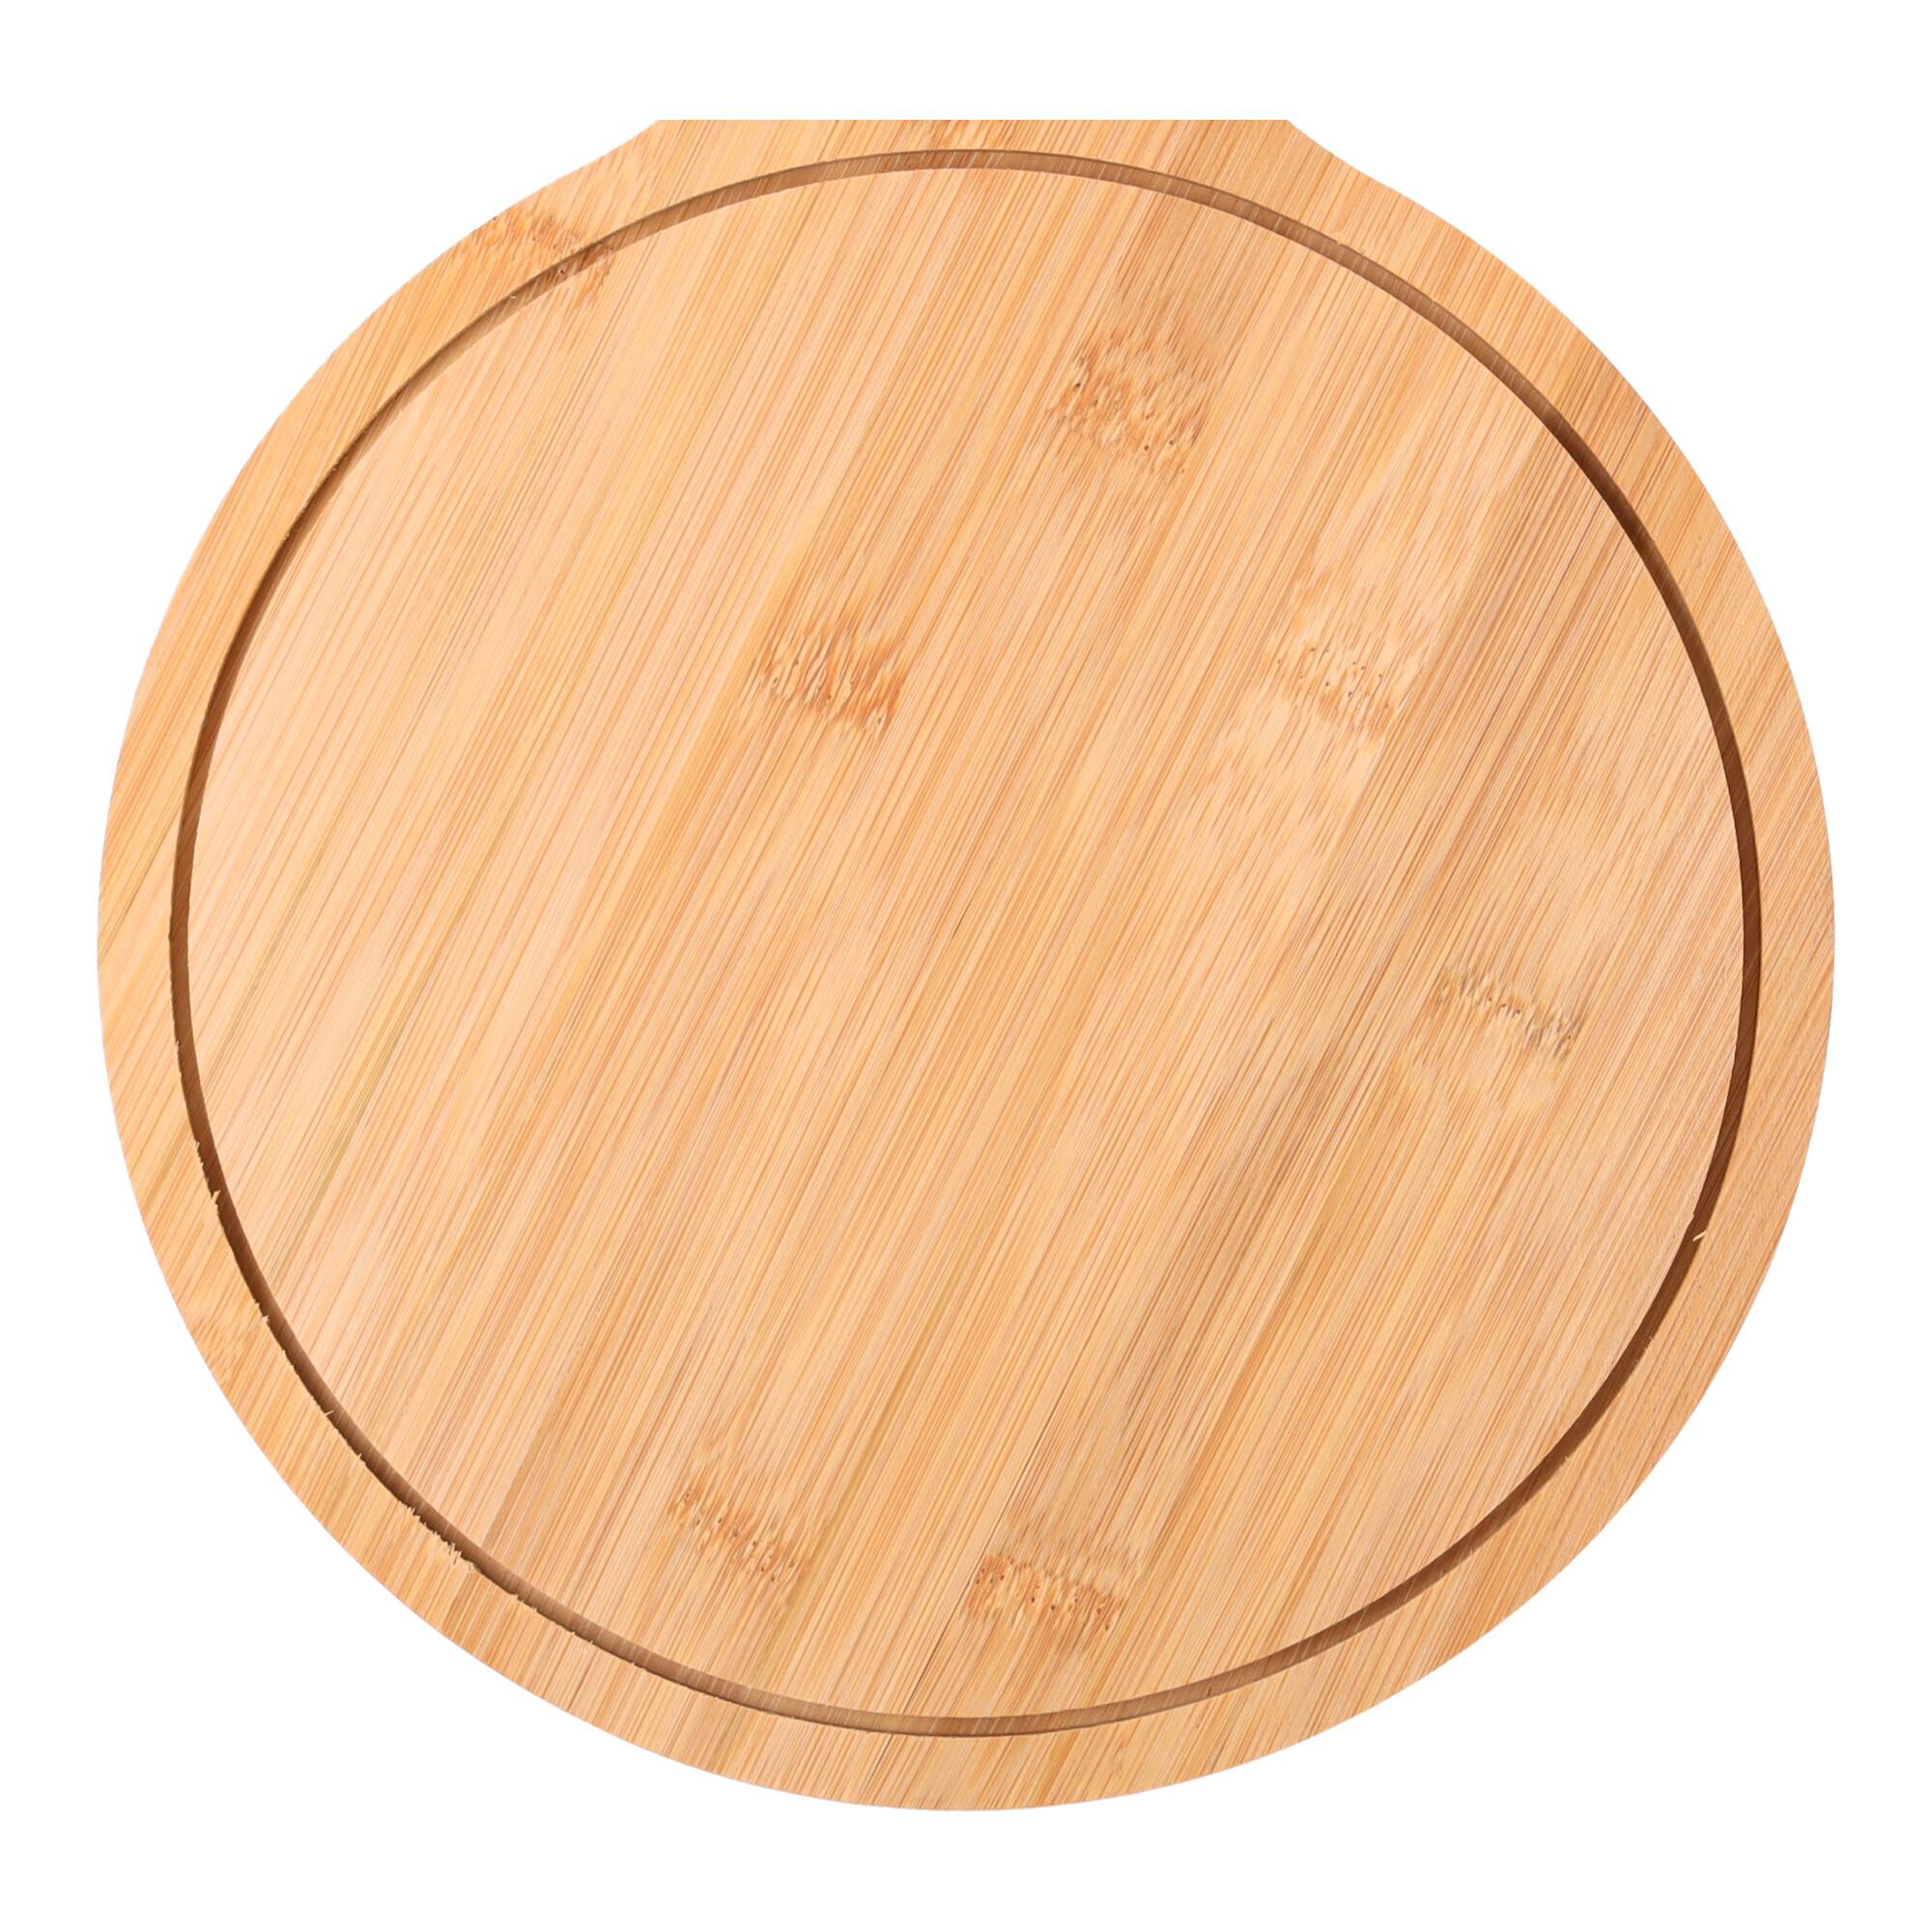 Wooden pizza board - round, size 38*26*1.2